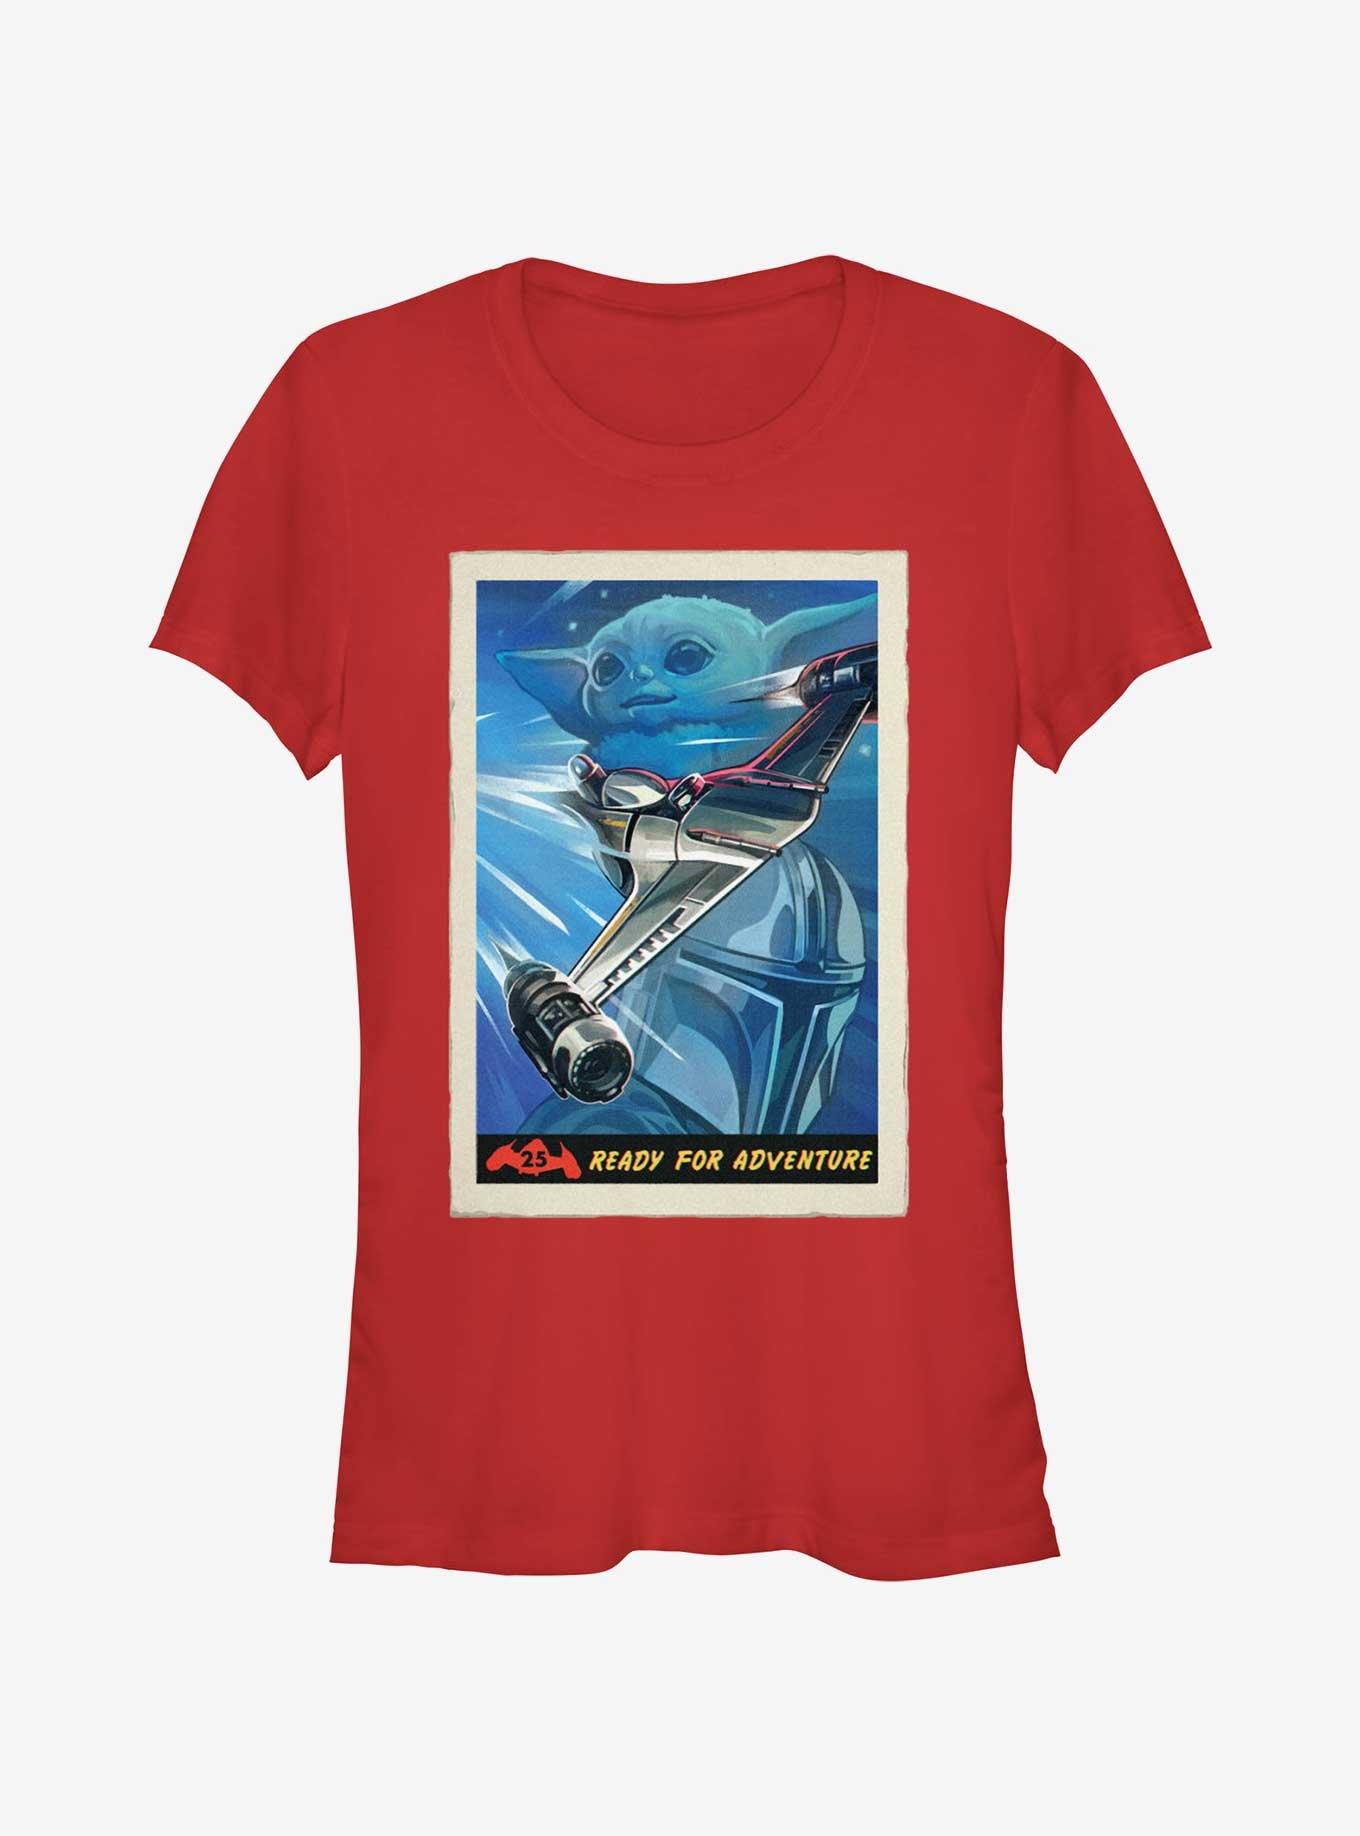 Star Wars The Mandalorian N-1 Starfighter Ready For Adventure Poster Girls T-Shirt, , hi-res